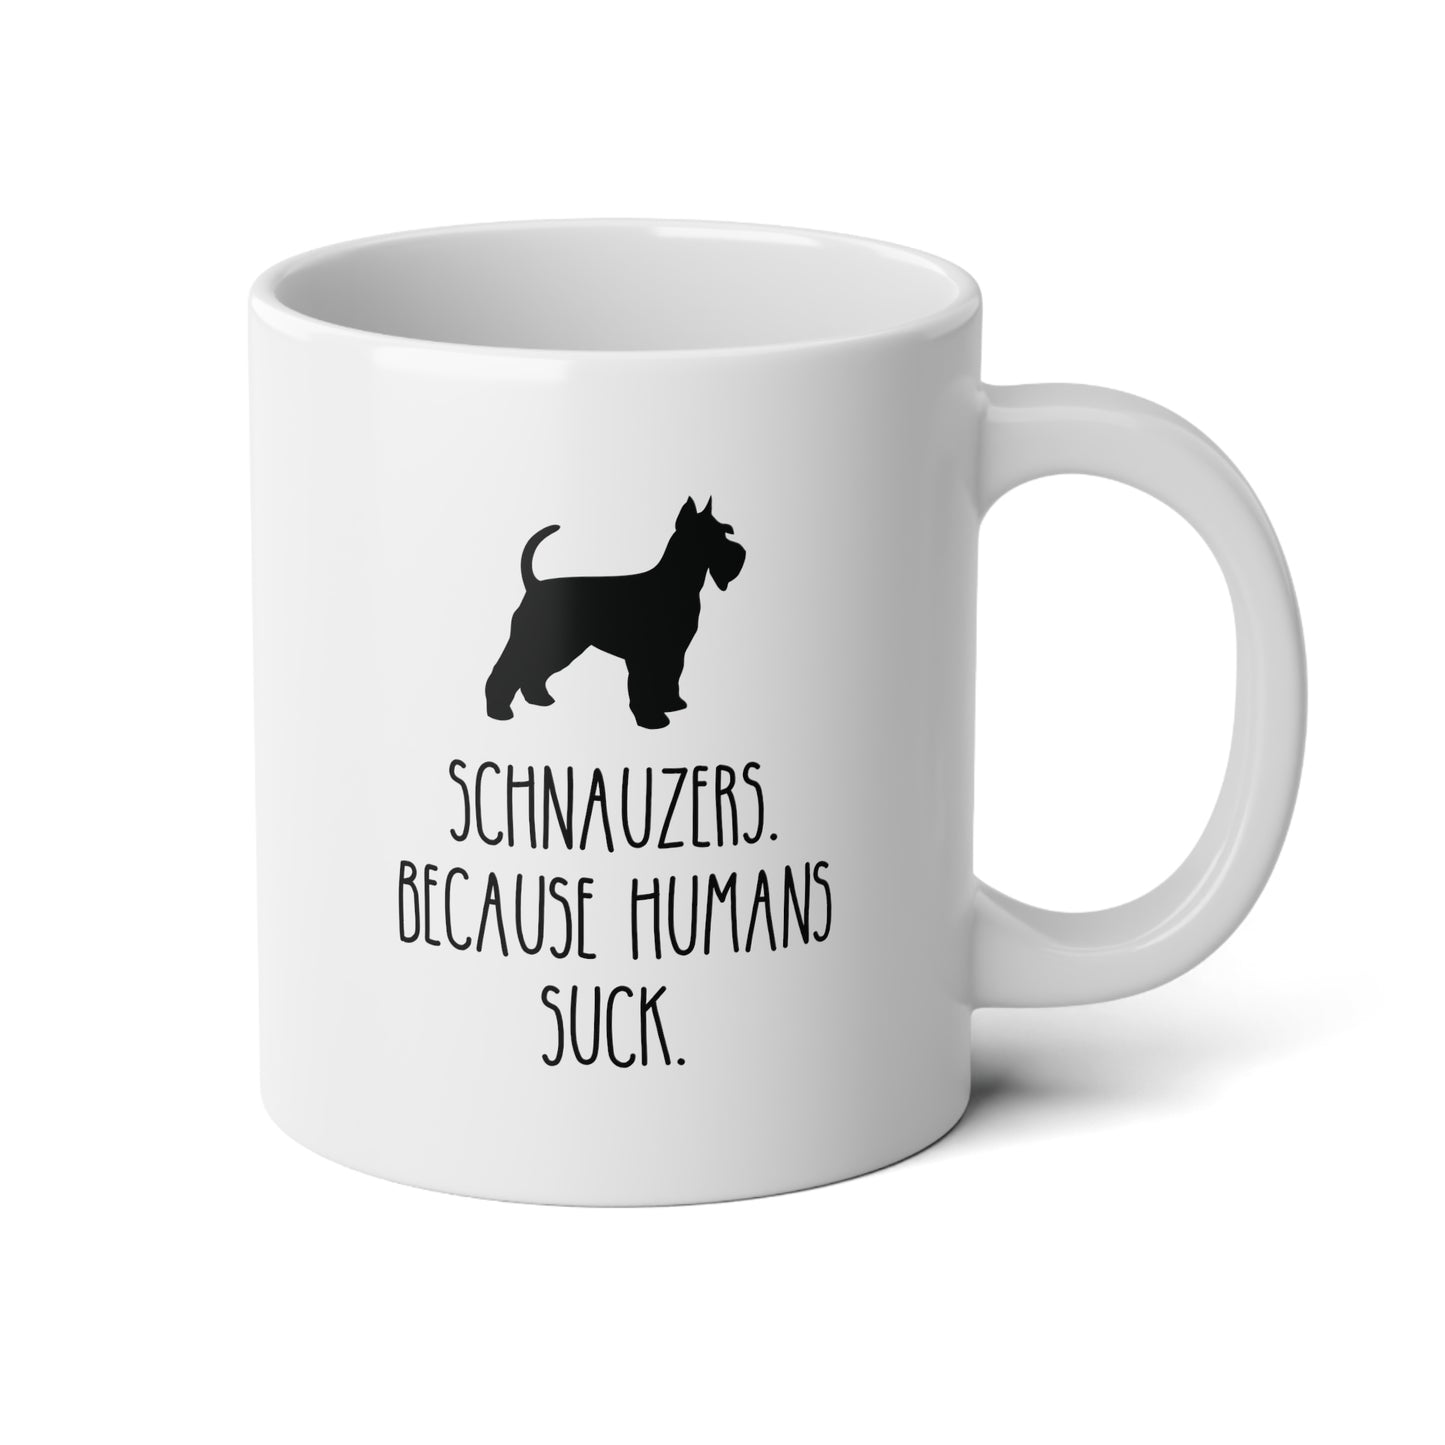 Schnauzers Because Humans Suck 20oz white funny large coffee mug gift for dog mom lover owner furmom waveywares wavey wares wavywares wavy wares